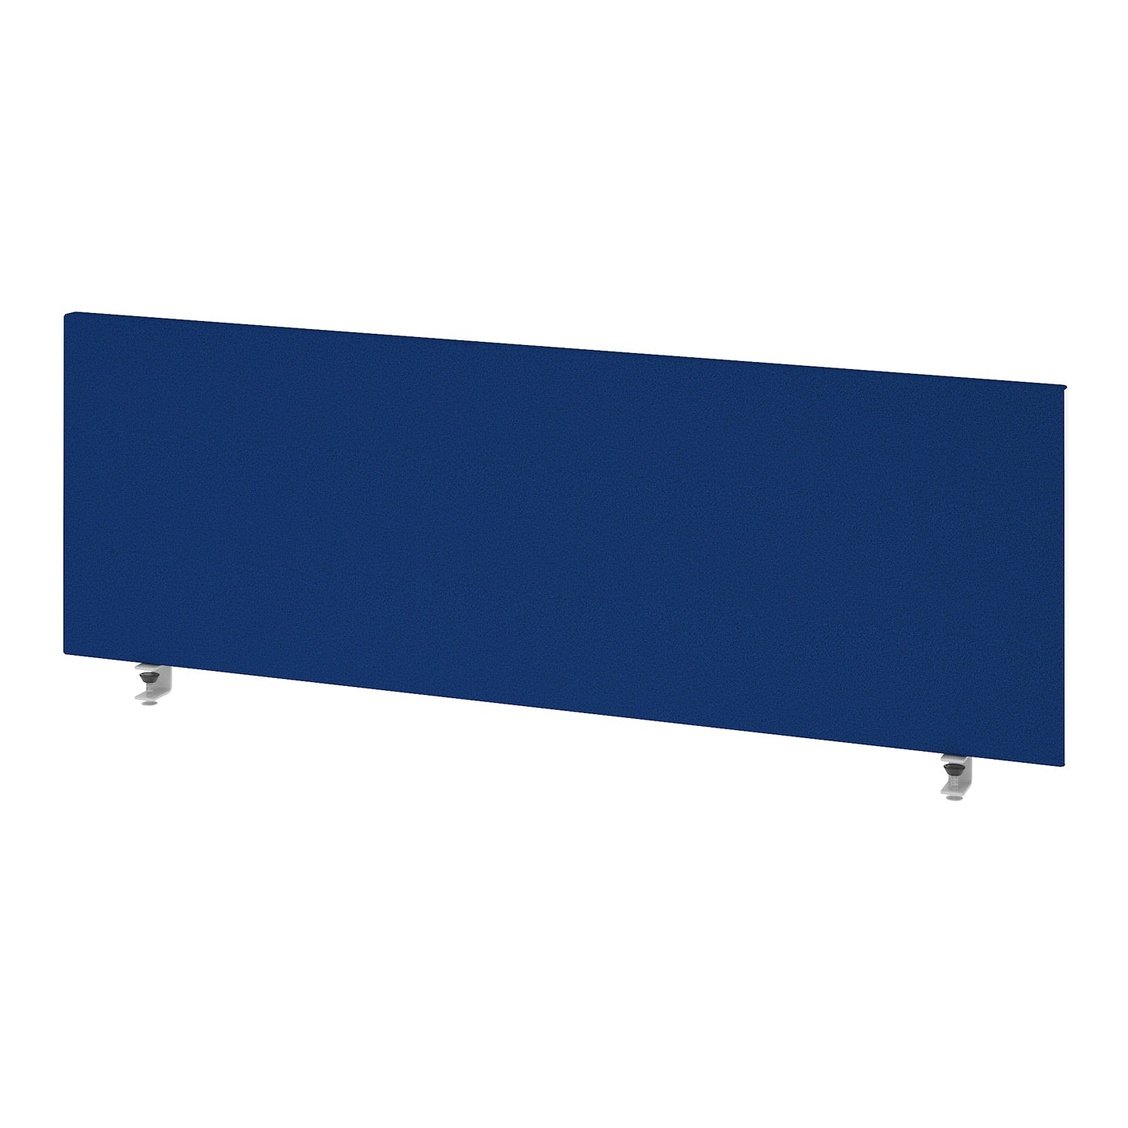 Impulse Straight Screen - Self-Assembly Fabric Divider, 1200-1800mm Width, 300-400mm Height, 25mm Depth - 5-Year Guarantee